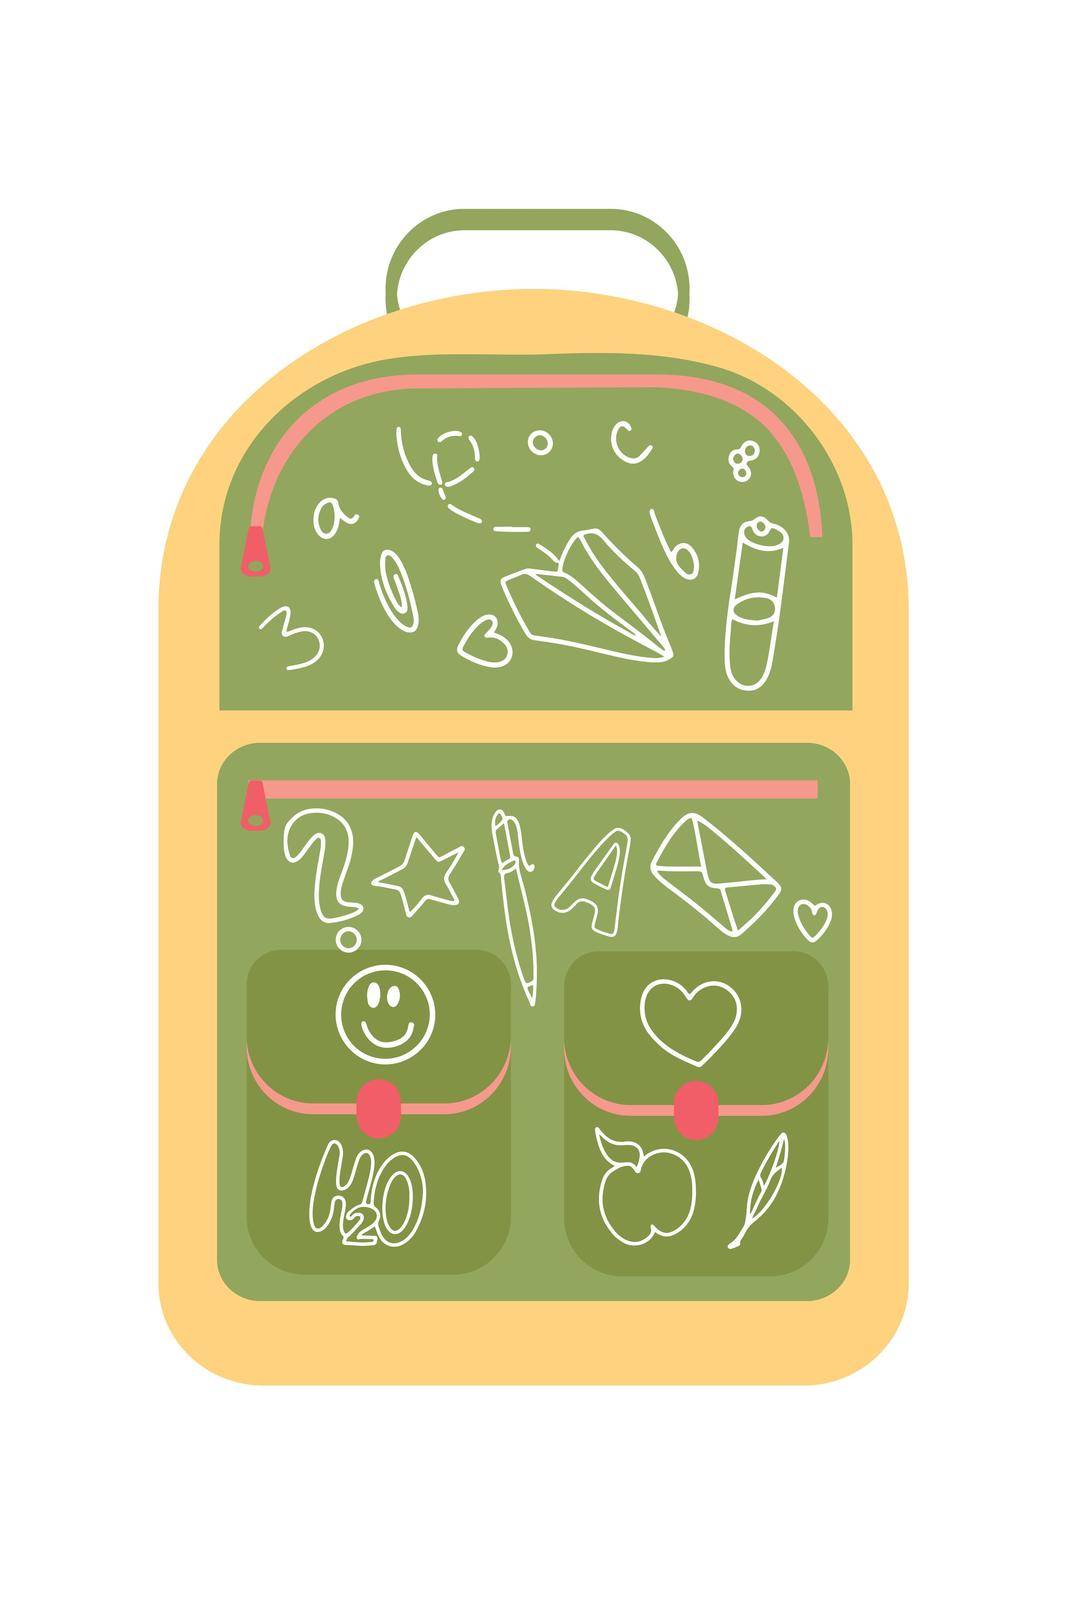 Multicolored school backpack. Vector illustration in a flat style with doodle drawings